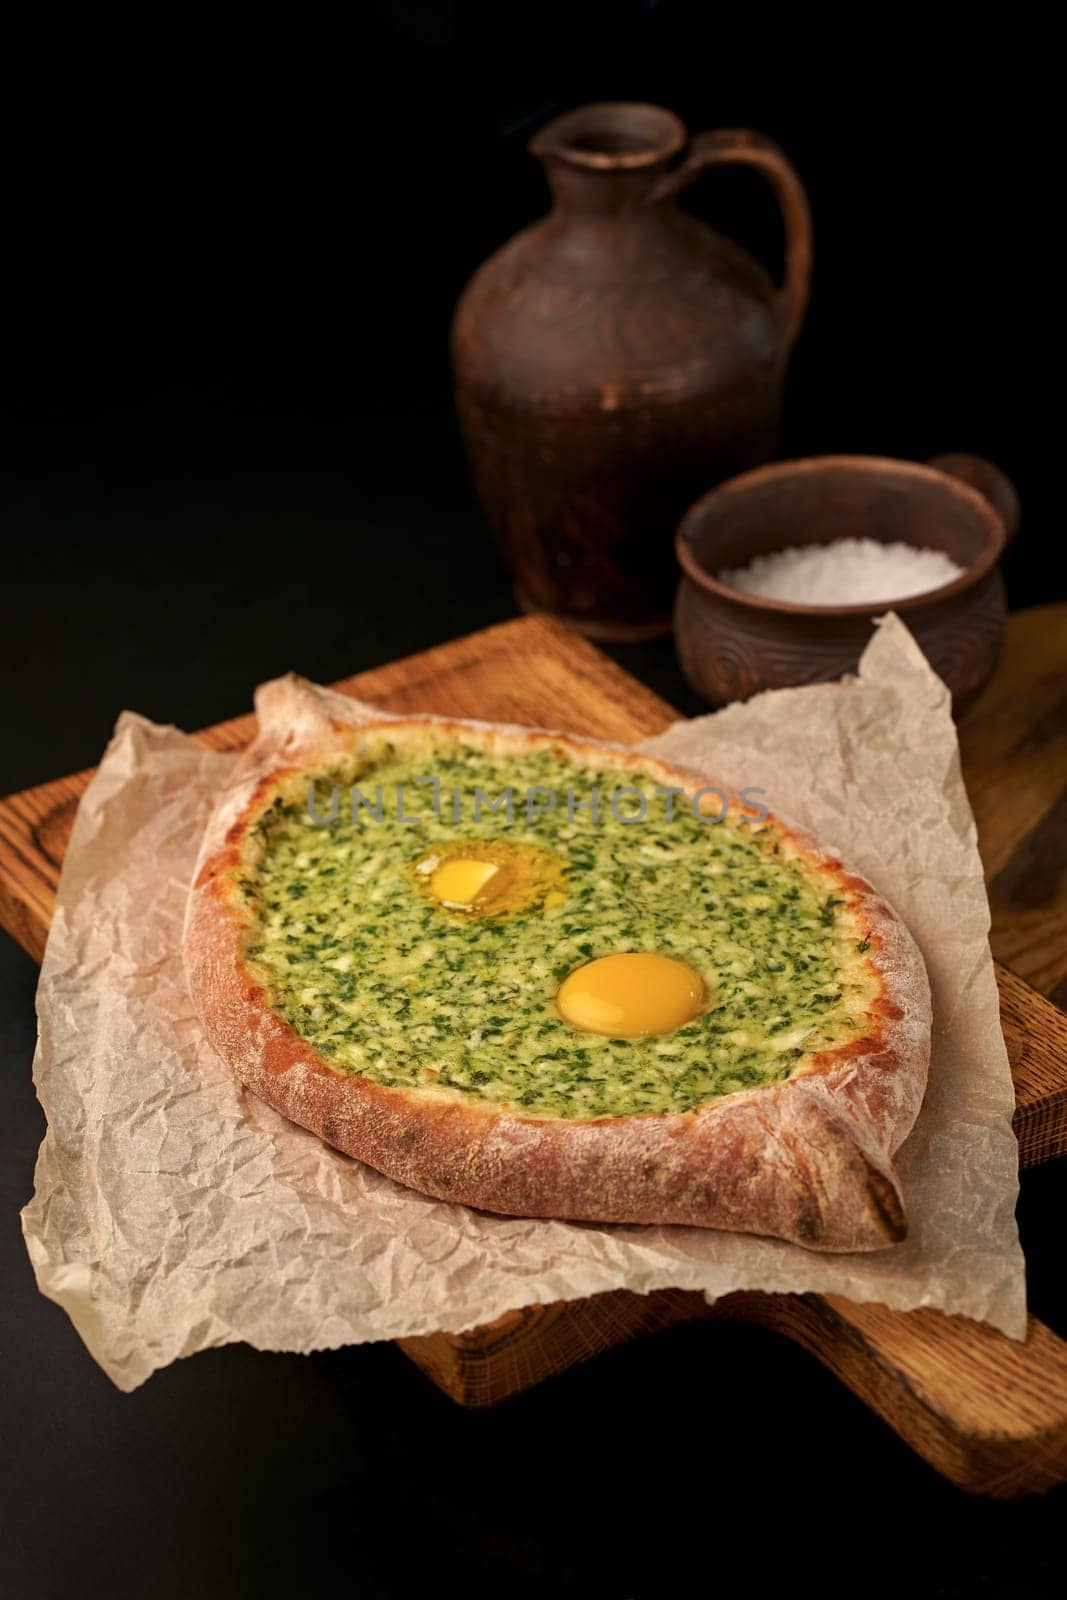 Traditional georgian pastry - adjarian khachapuri with cheese and raw yolk. Khachapuri with egg on wooden background in rustic style. Adjara khachapuri with ingredients. Georgian cuisine by aprilphoto